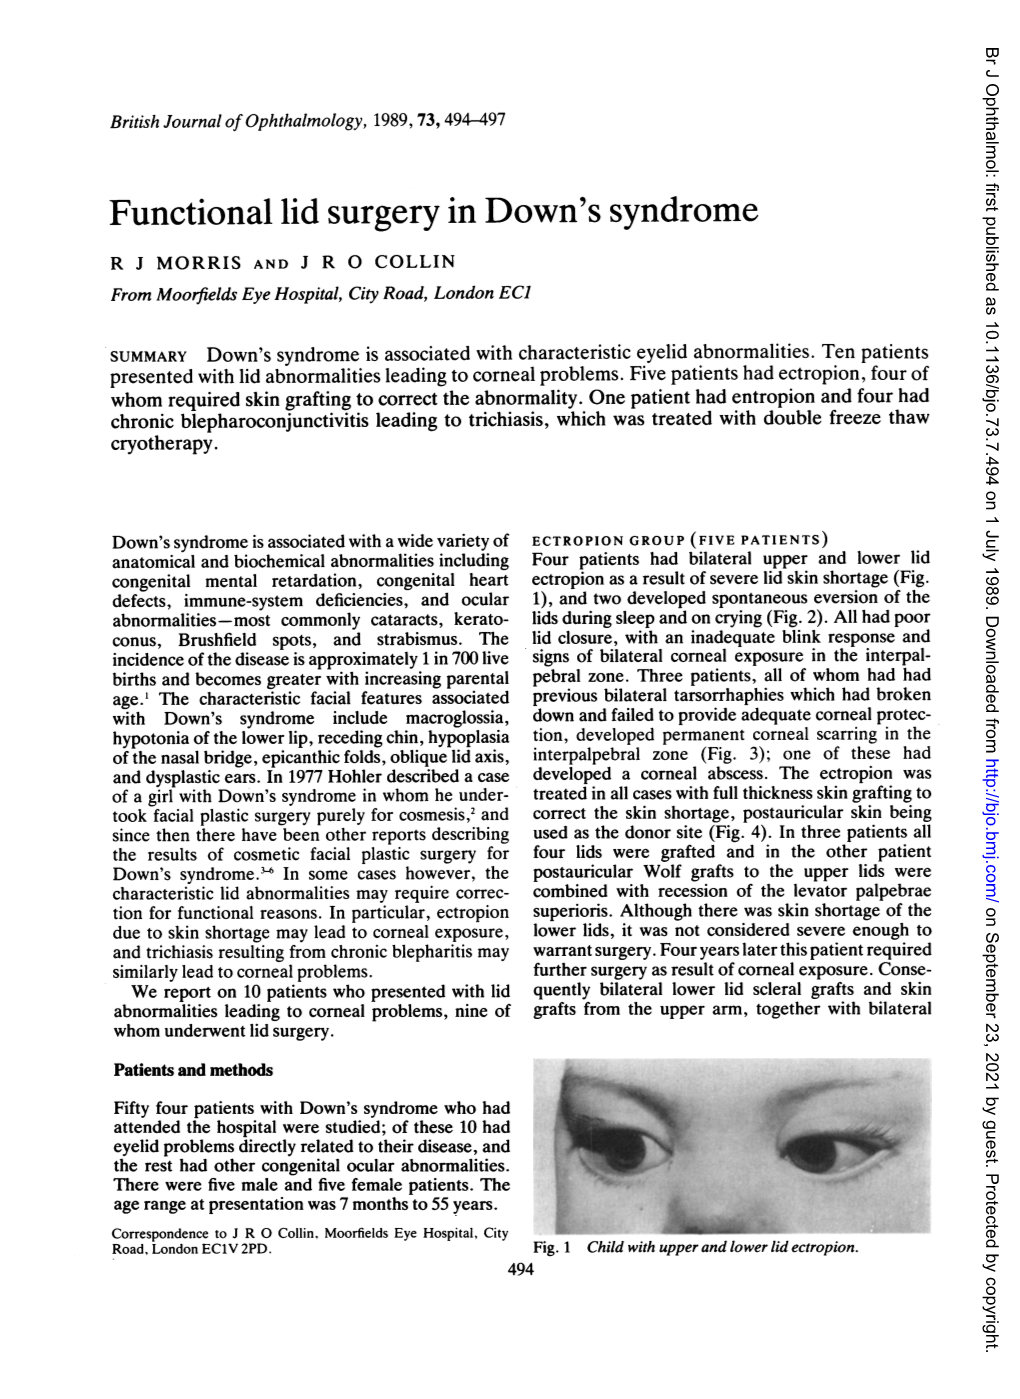 Functional Lid Surgery in Down's Syndrome